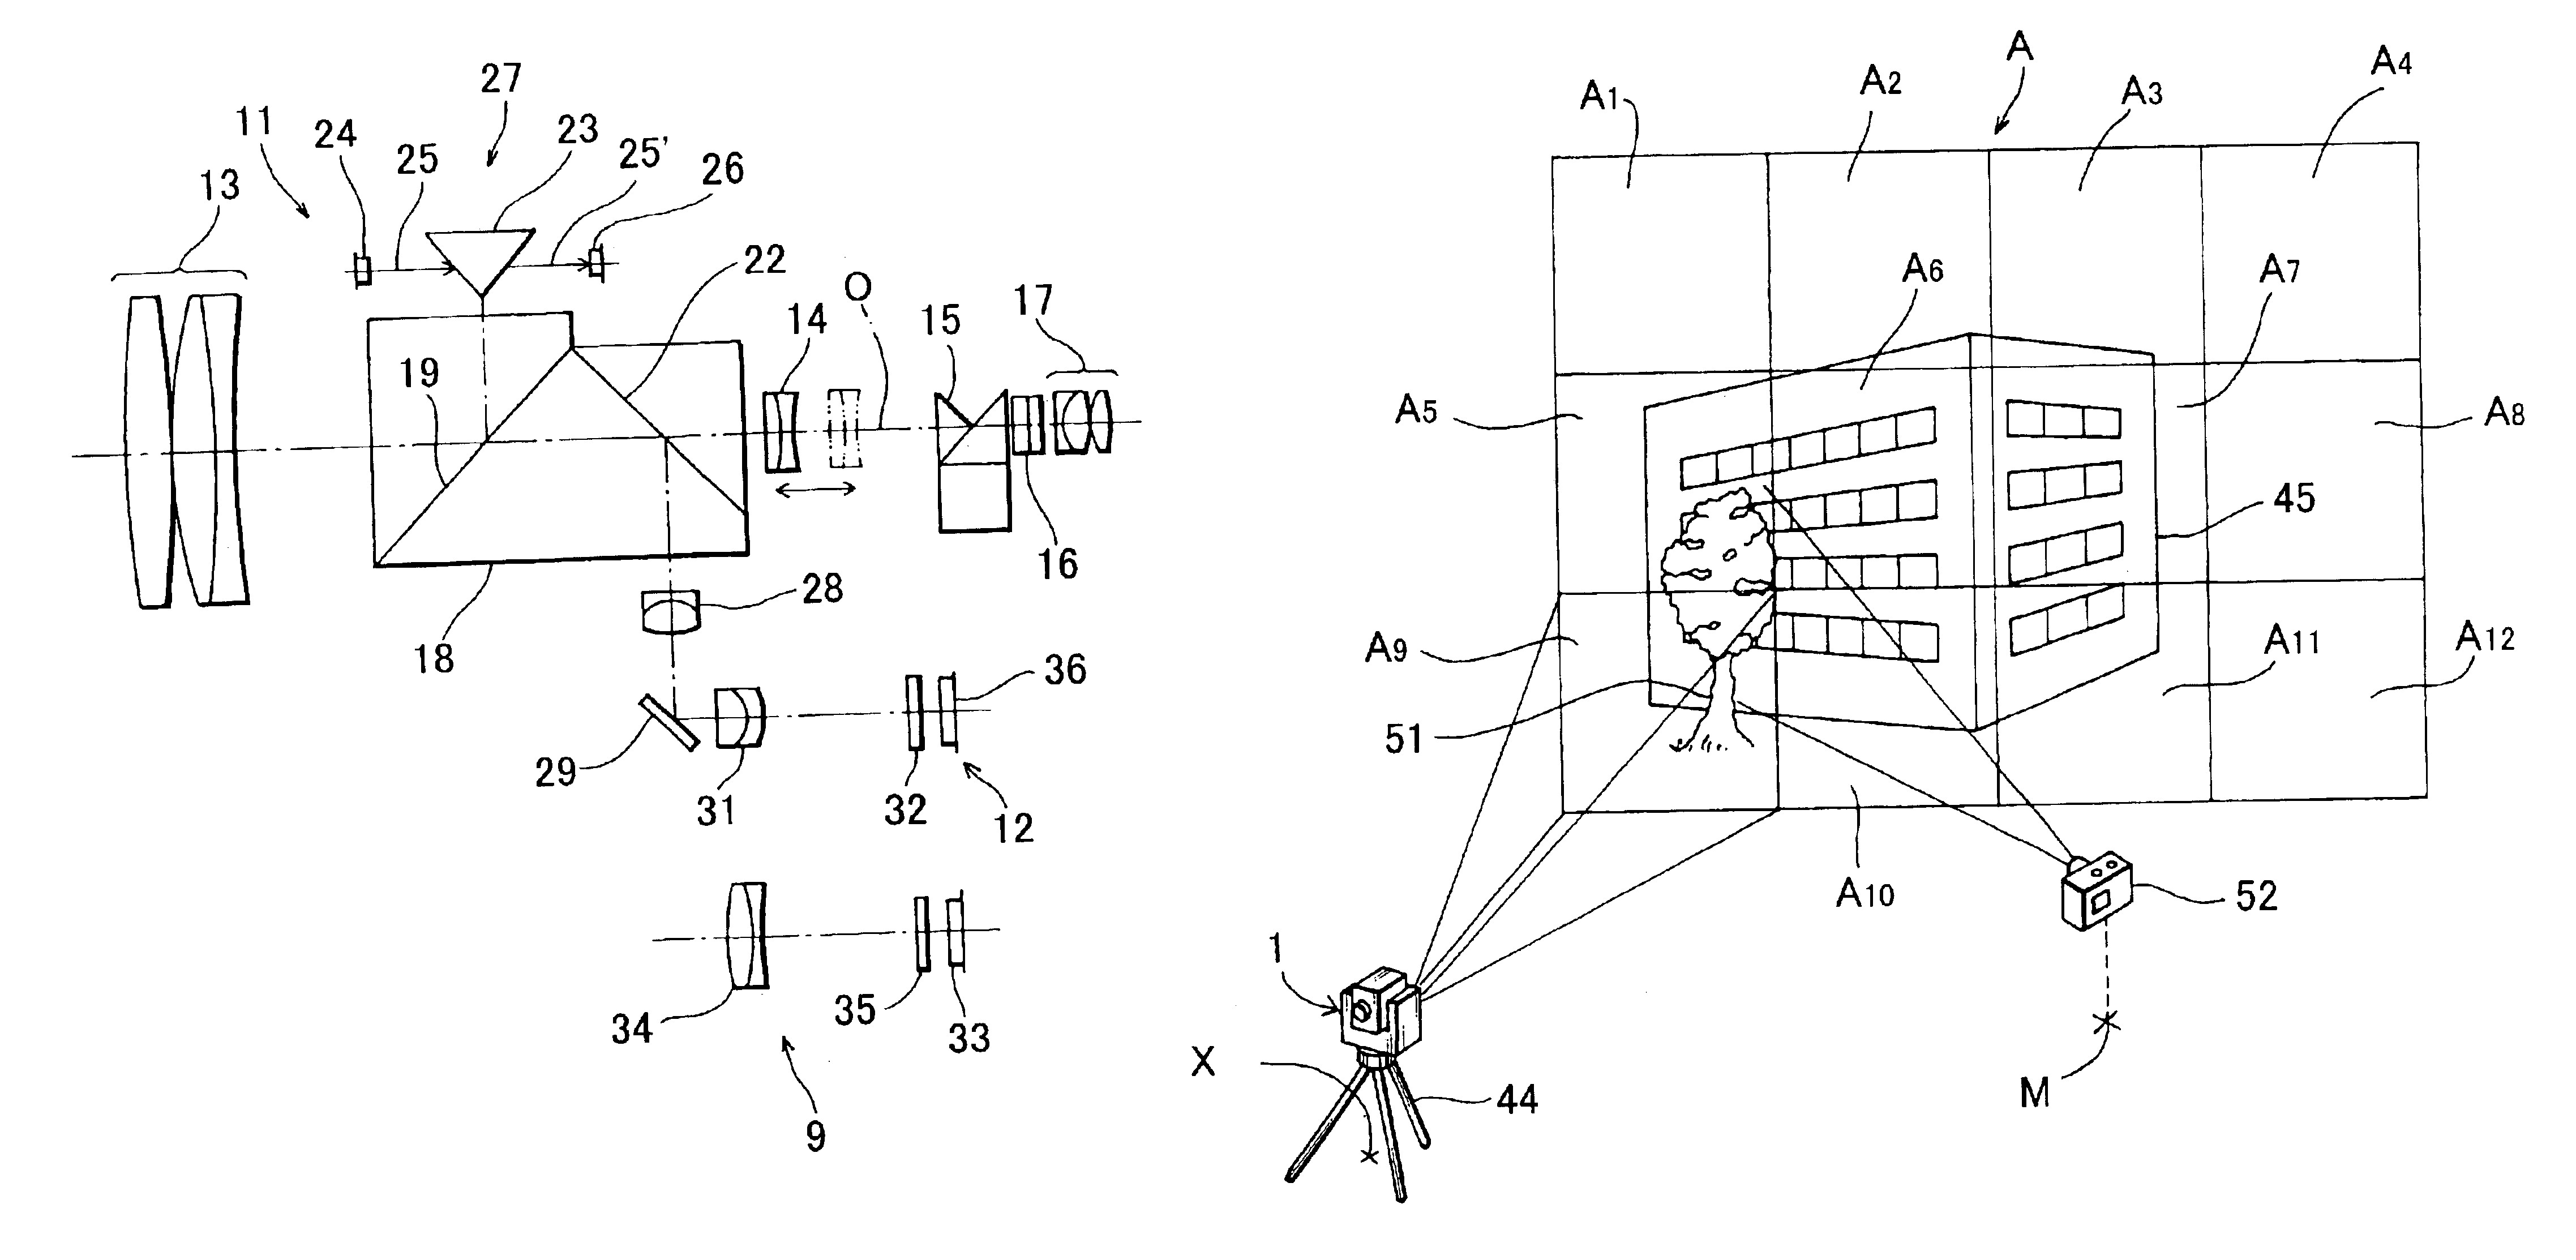 Surveying instrument and method for acquiring image data by using the surveying instrument